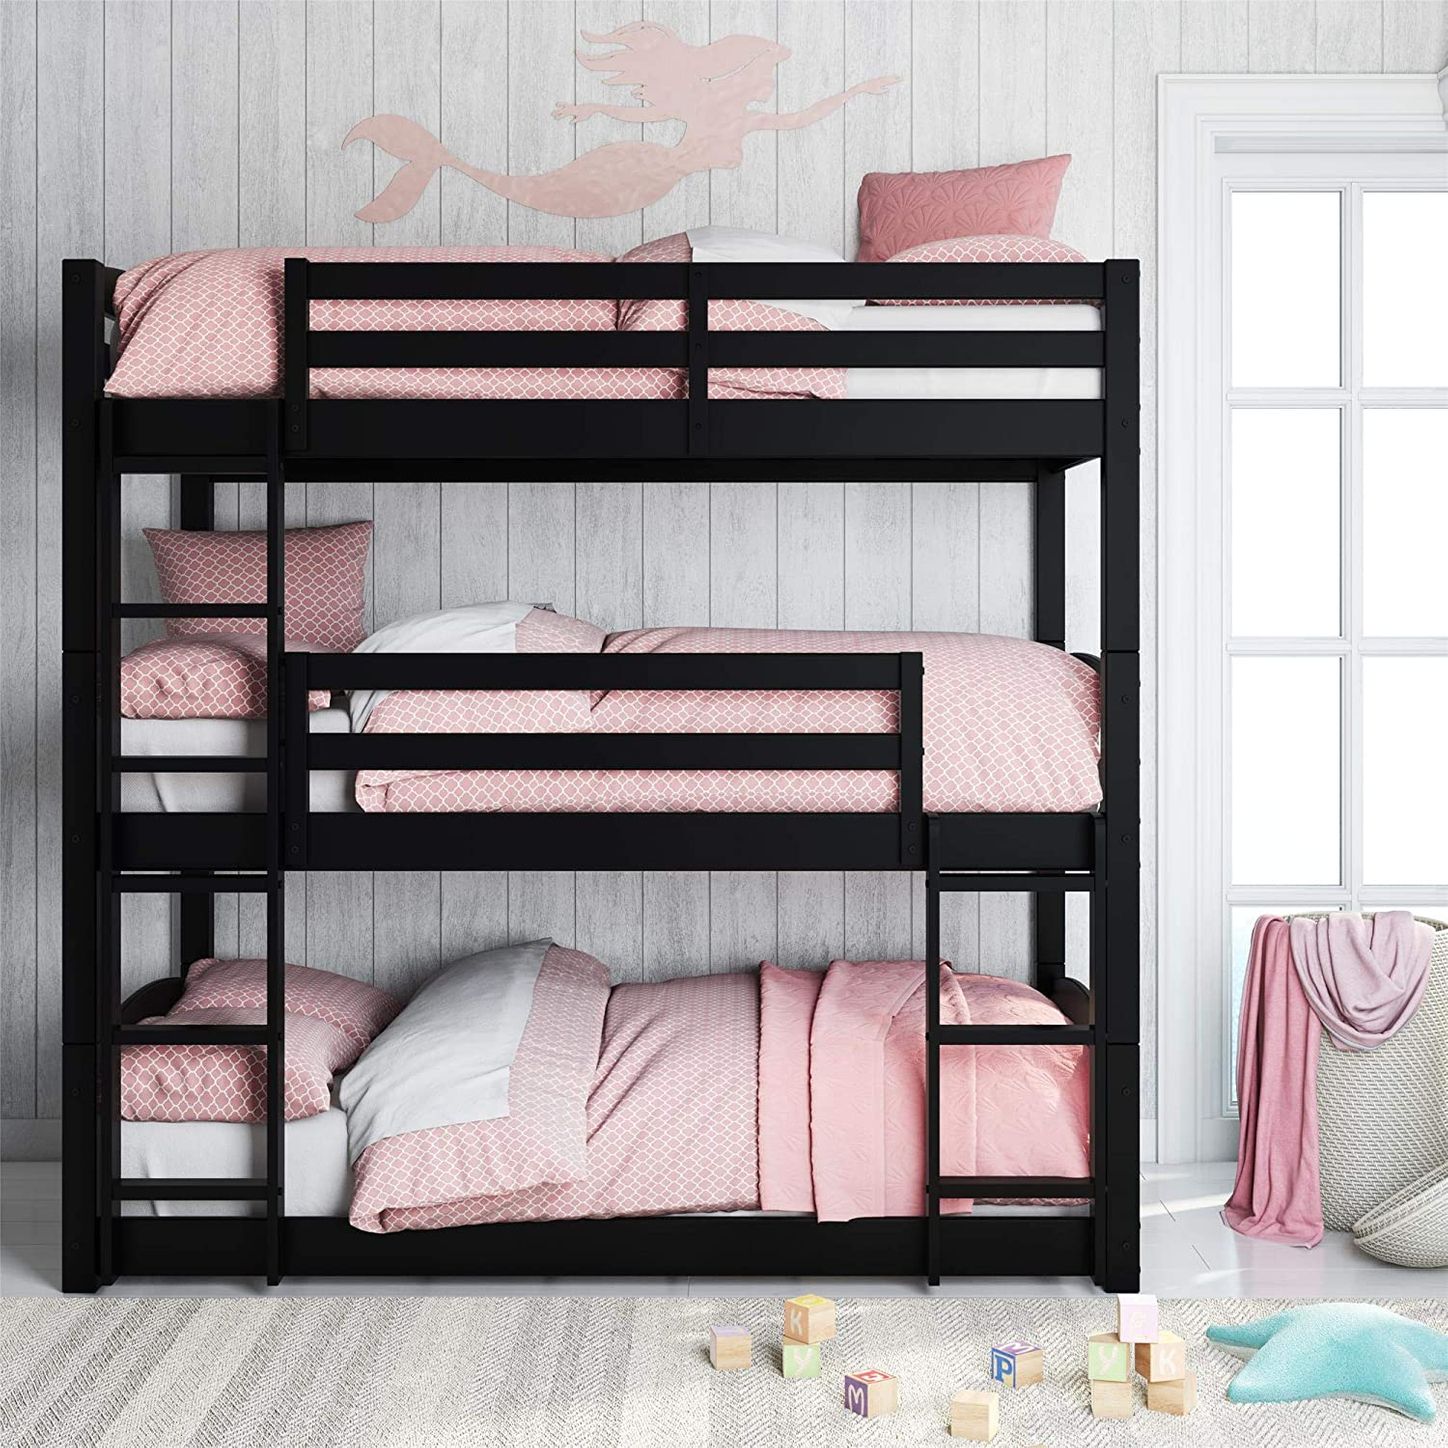 8 Best Bunk Beds 2020 The Strategist, Princess Loft Bed With Slide Rooms To Go